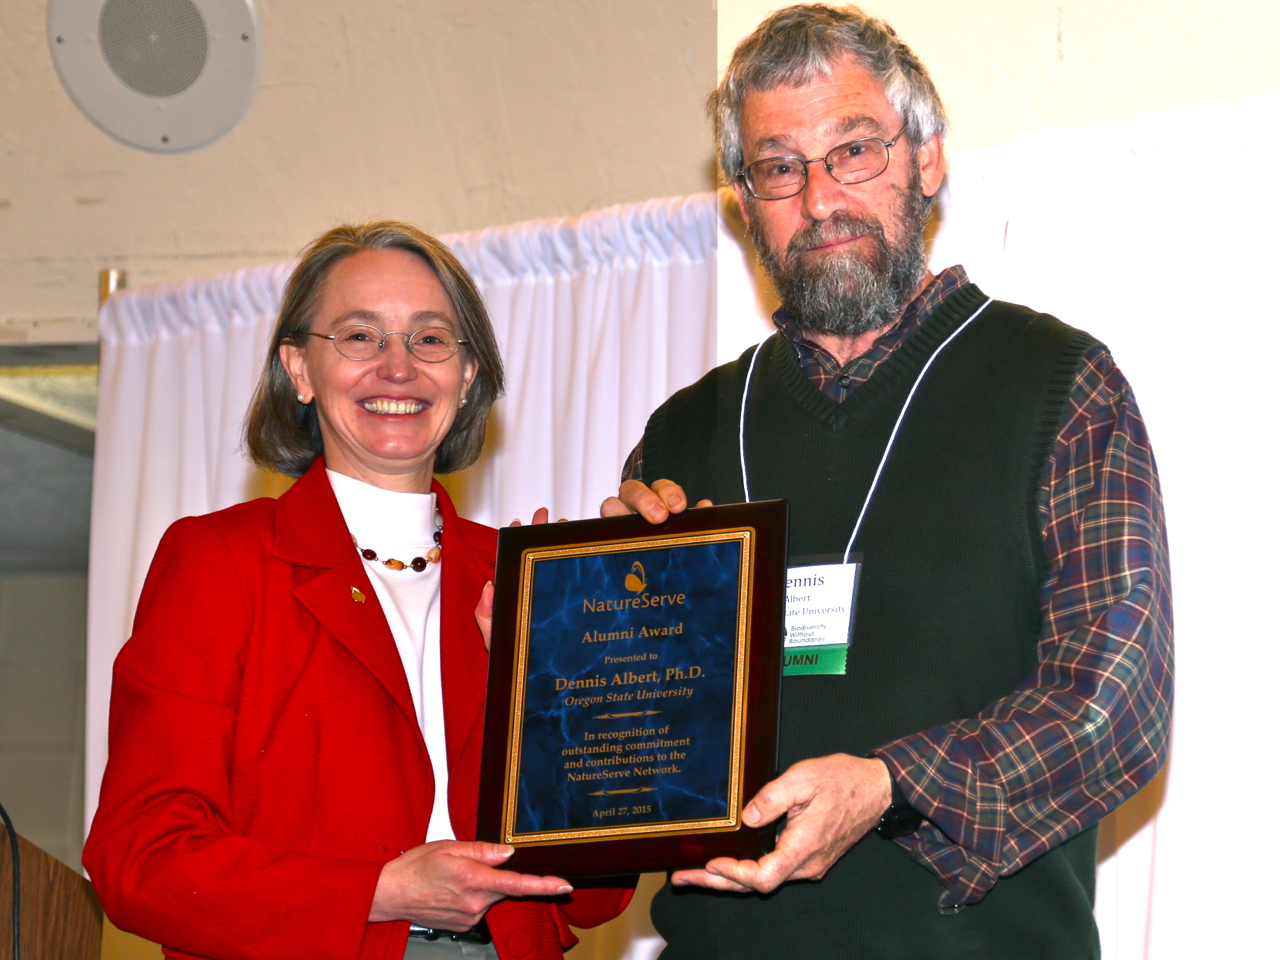 Dennis Albert, a former lead ecologist for the Michigan Natural Features Inventory, receives the 2015 NatureServe Alumni Award.